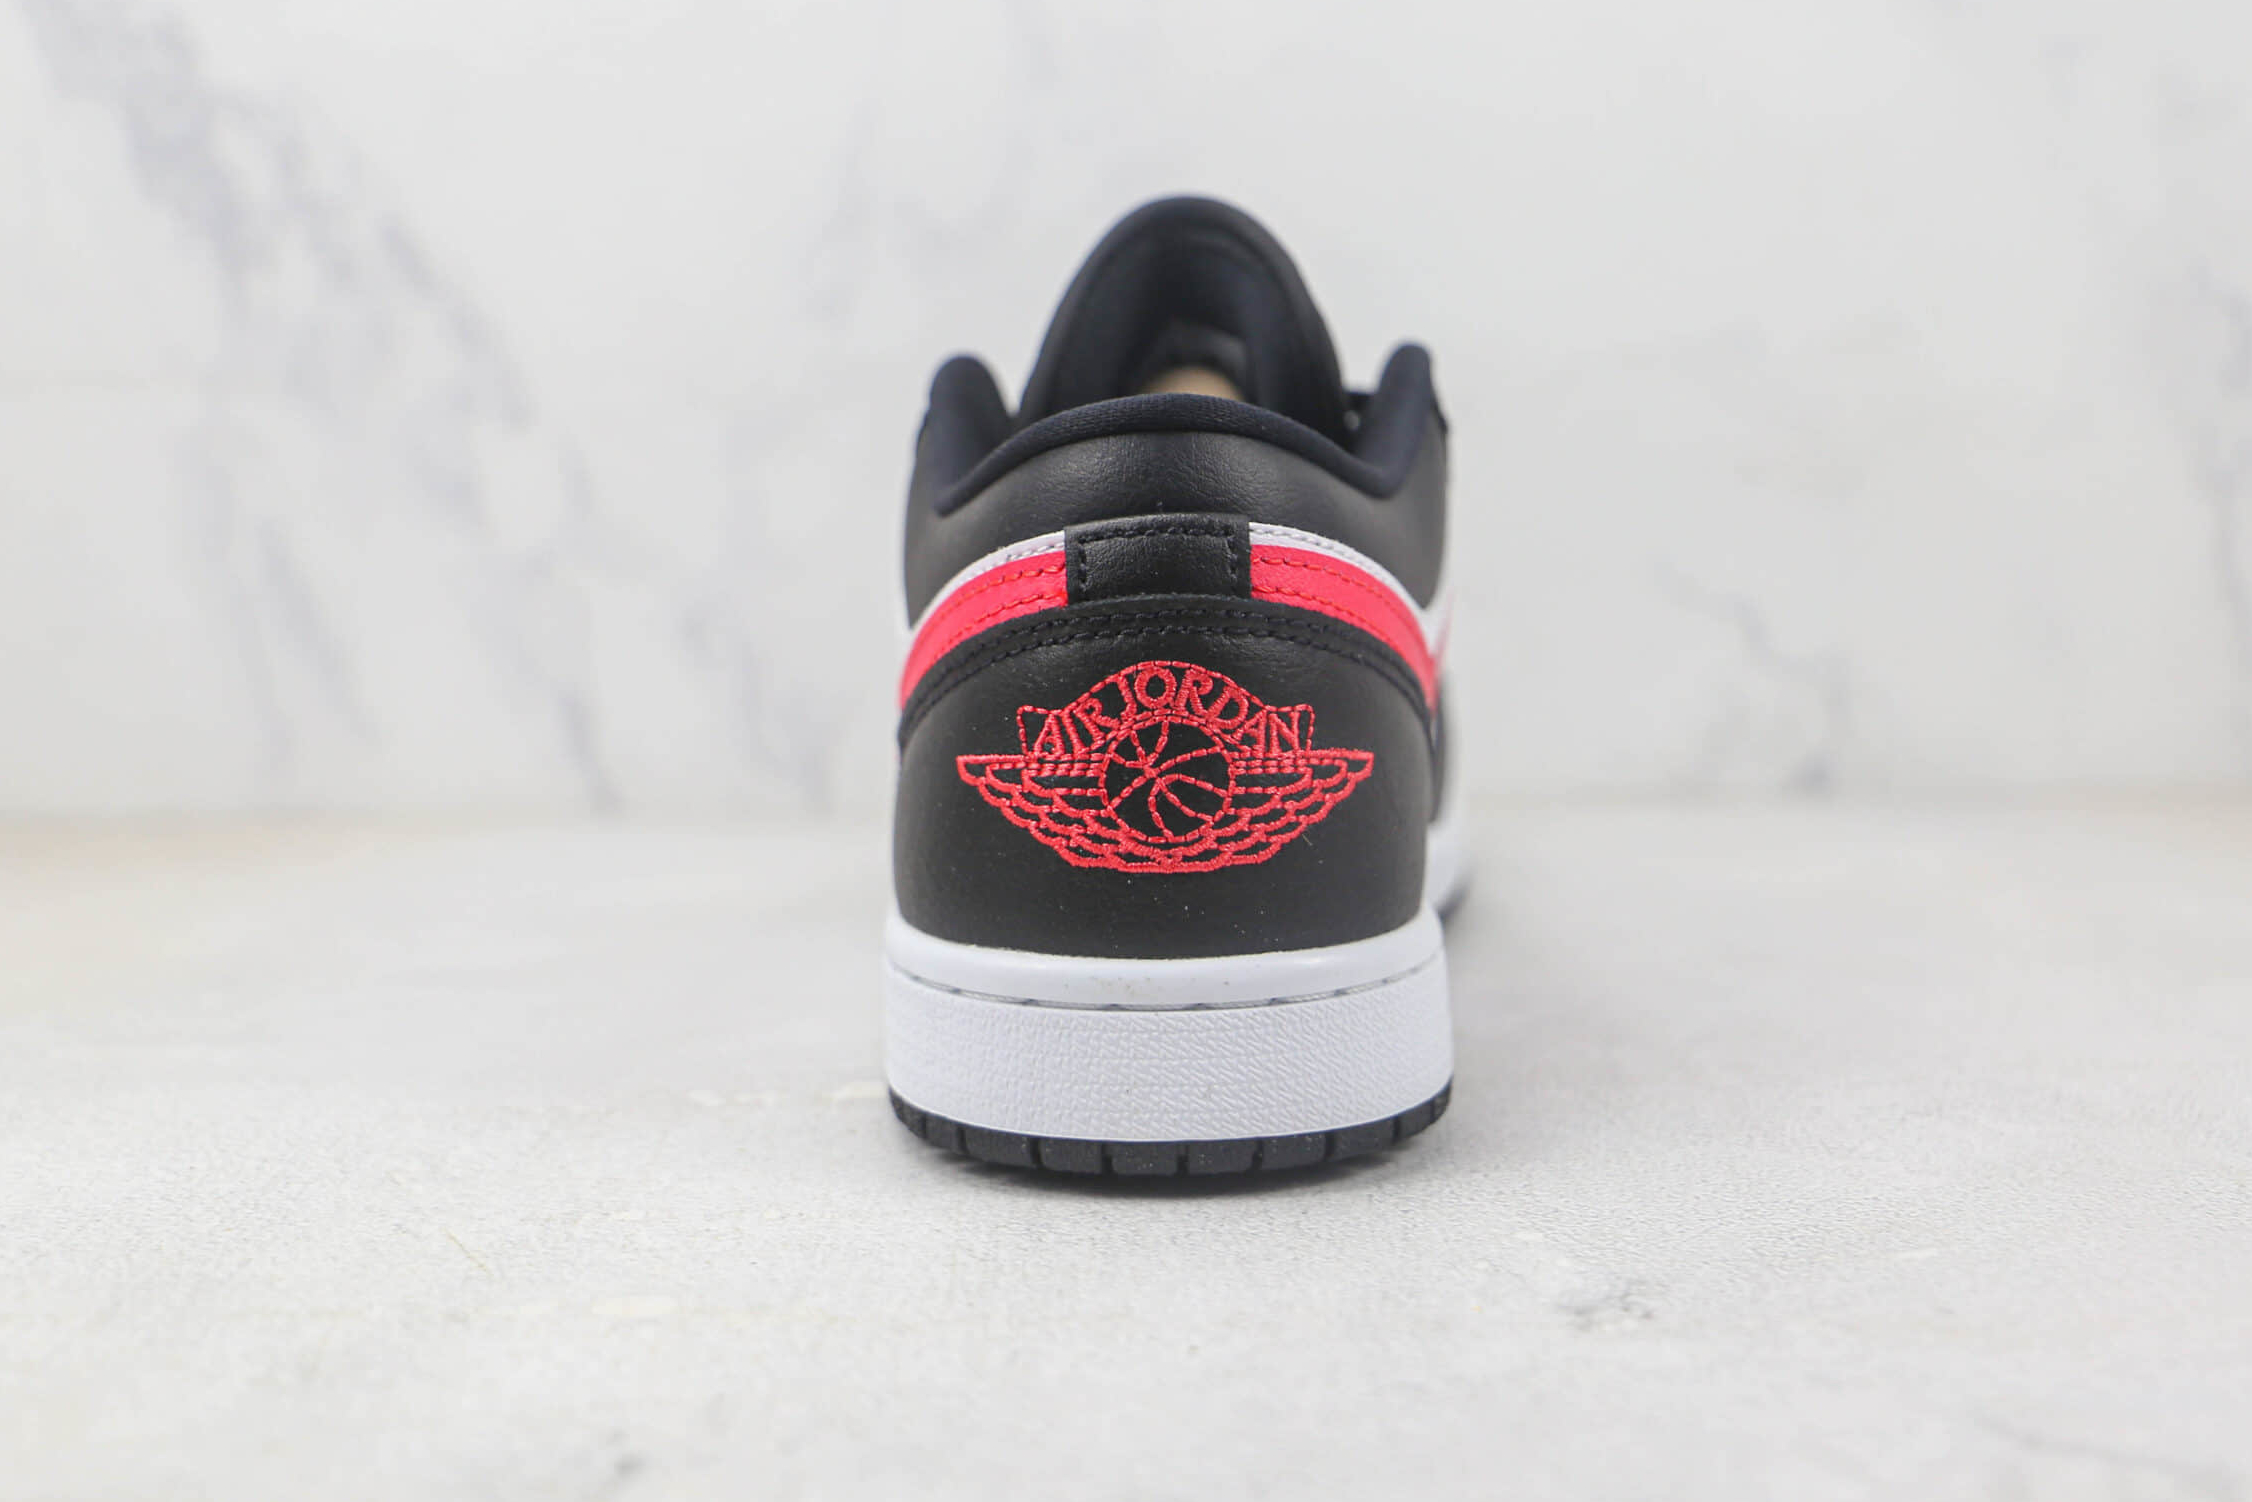 Air Jordan 1 Low 'Black Siren Red' DC0774-004 - Stylish and Iconic Sneakers